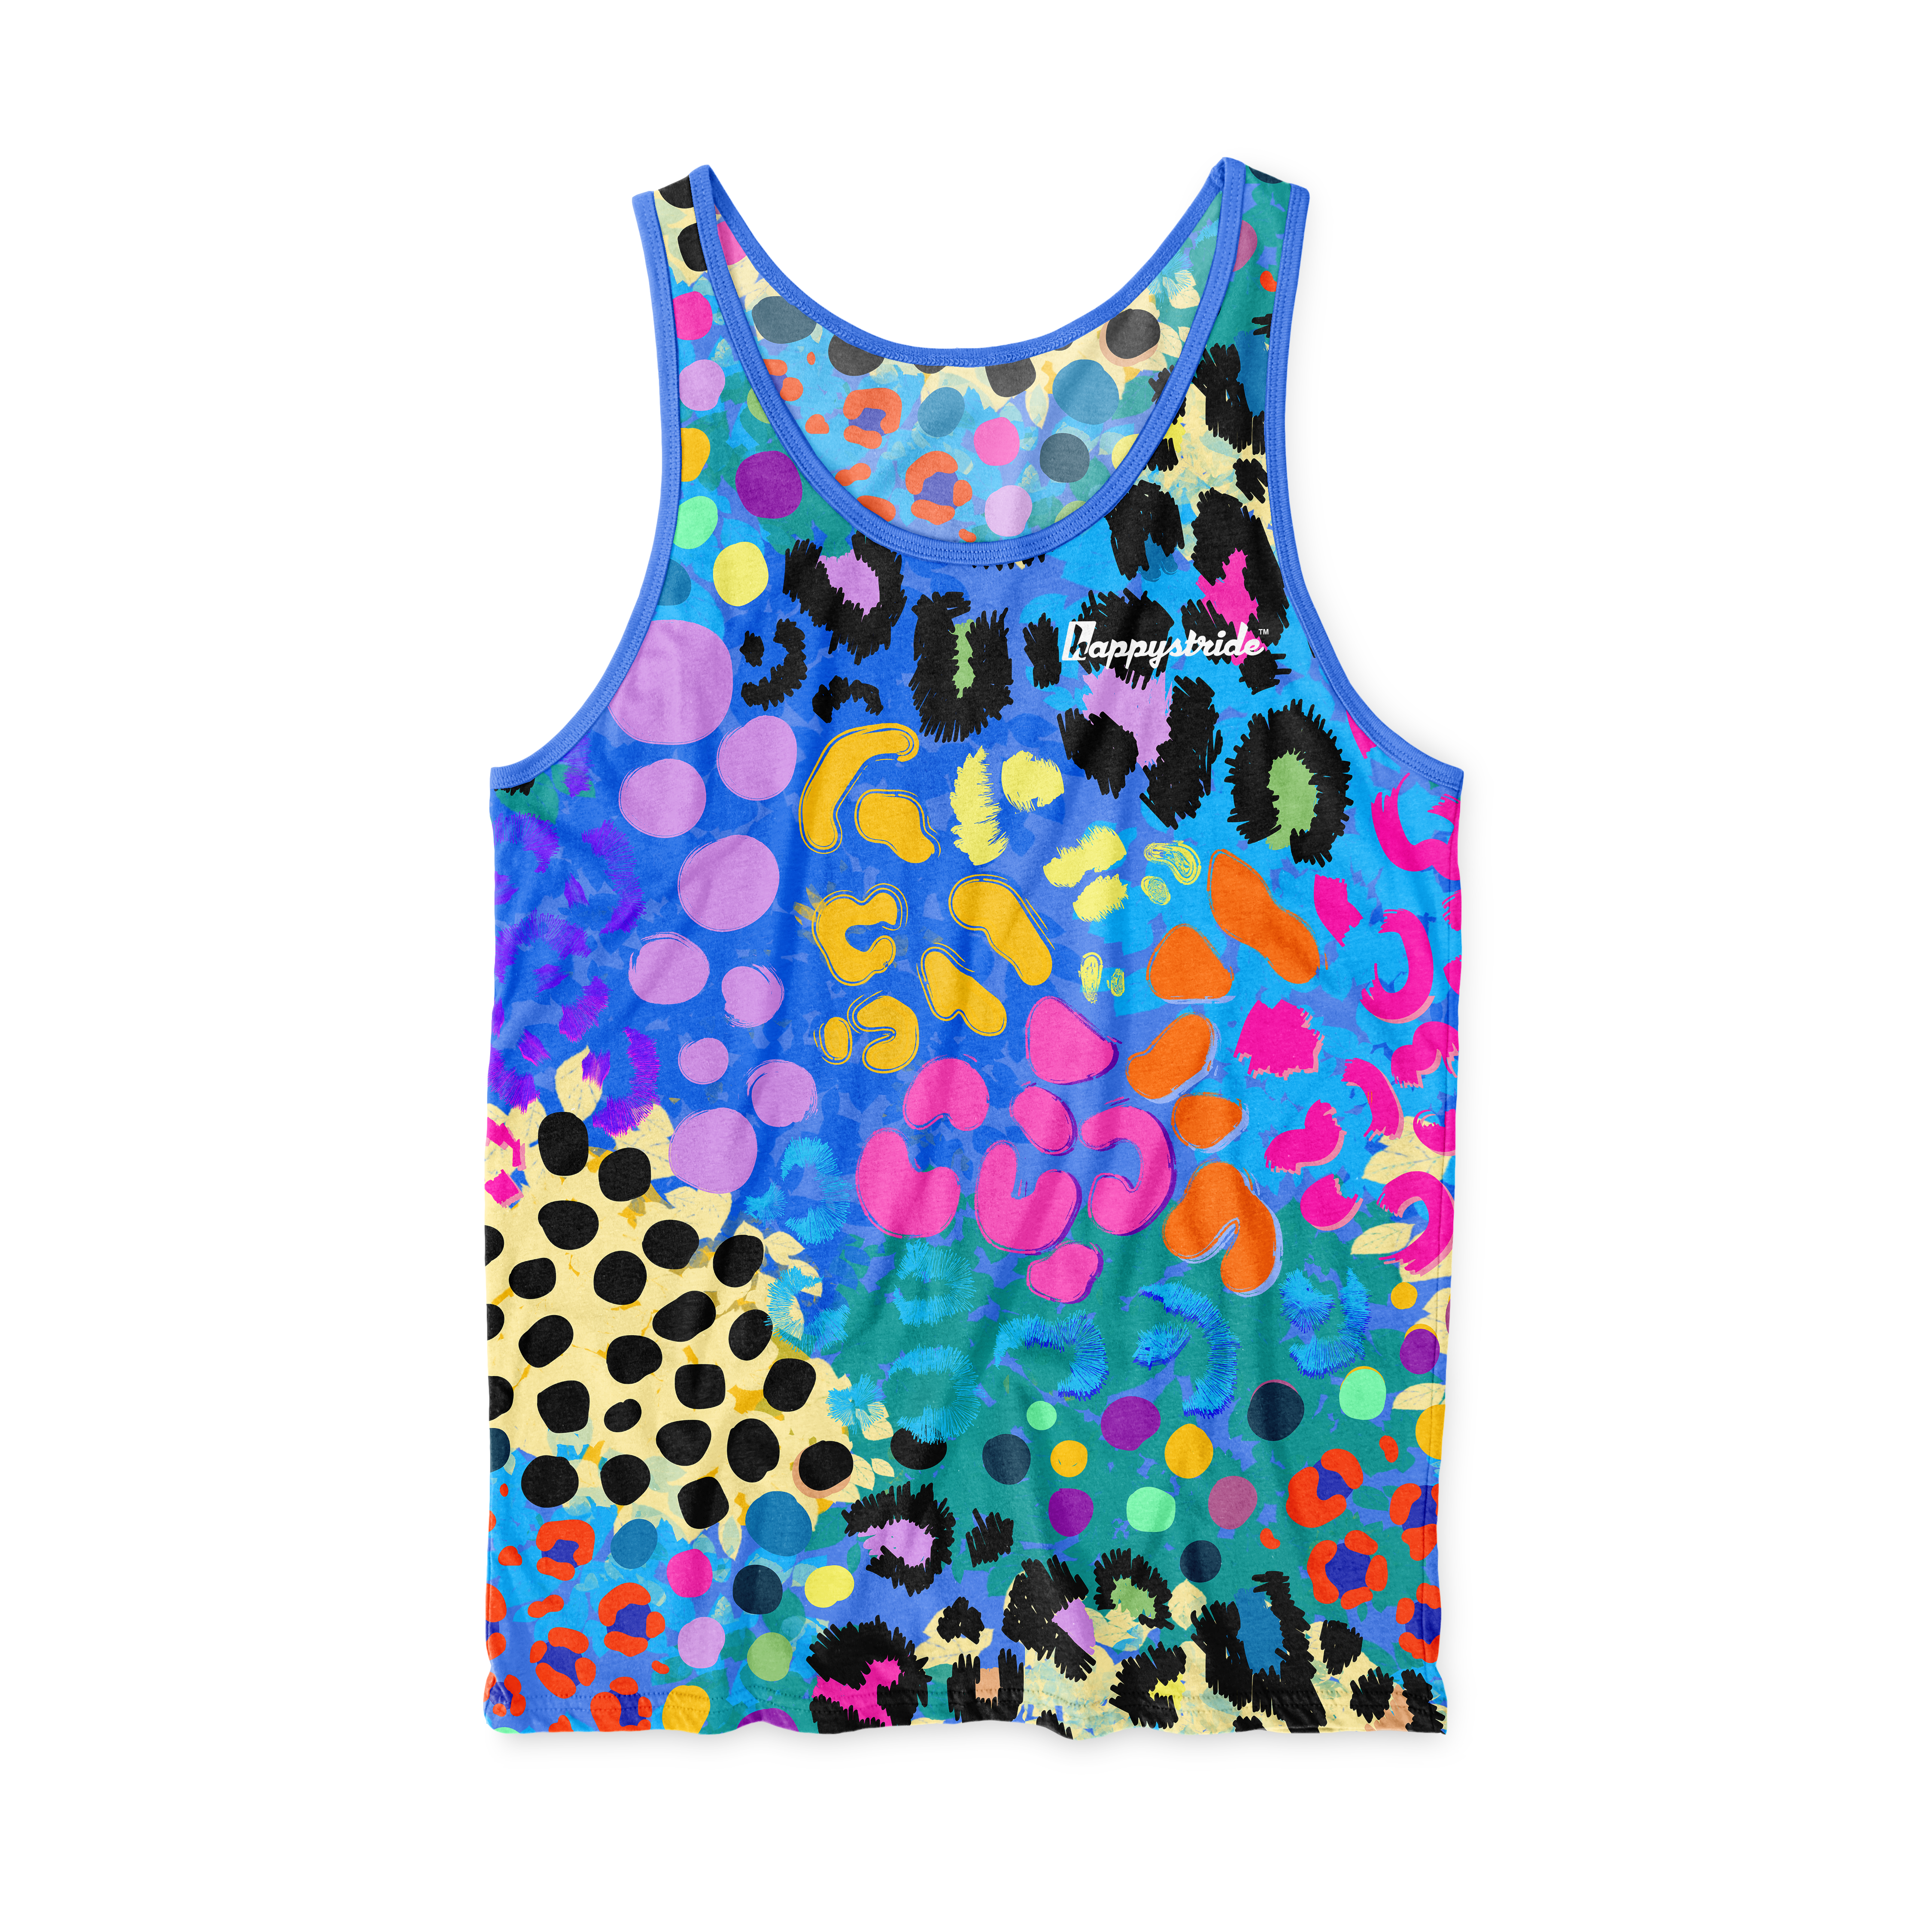 ''Get spotted" wild tribe vest